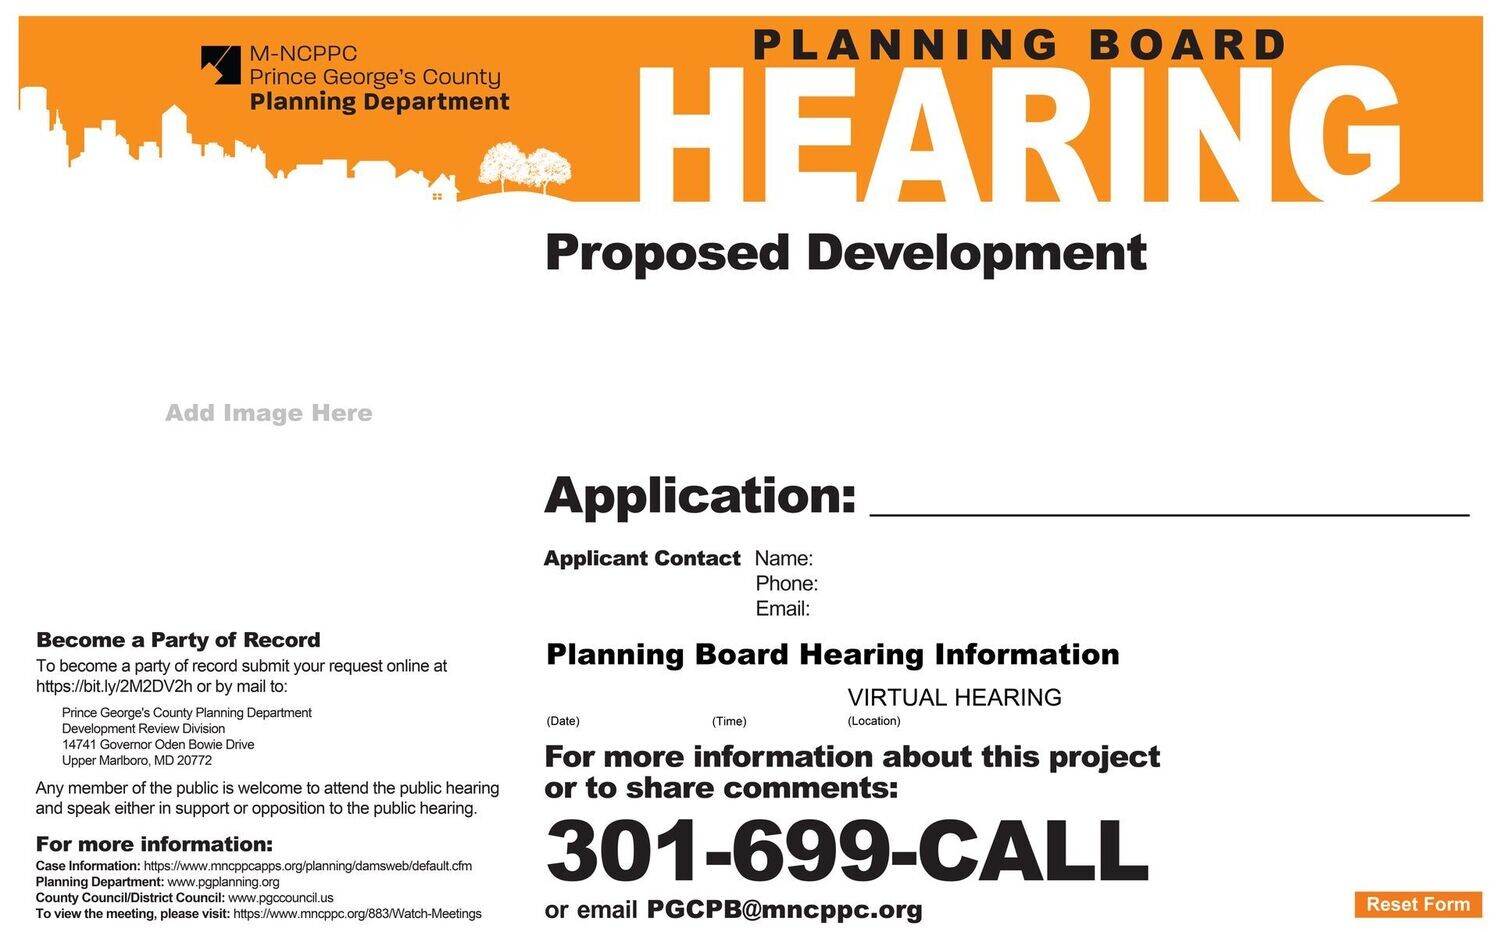 PLANNING BOARD HEARING Sign.